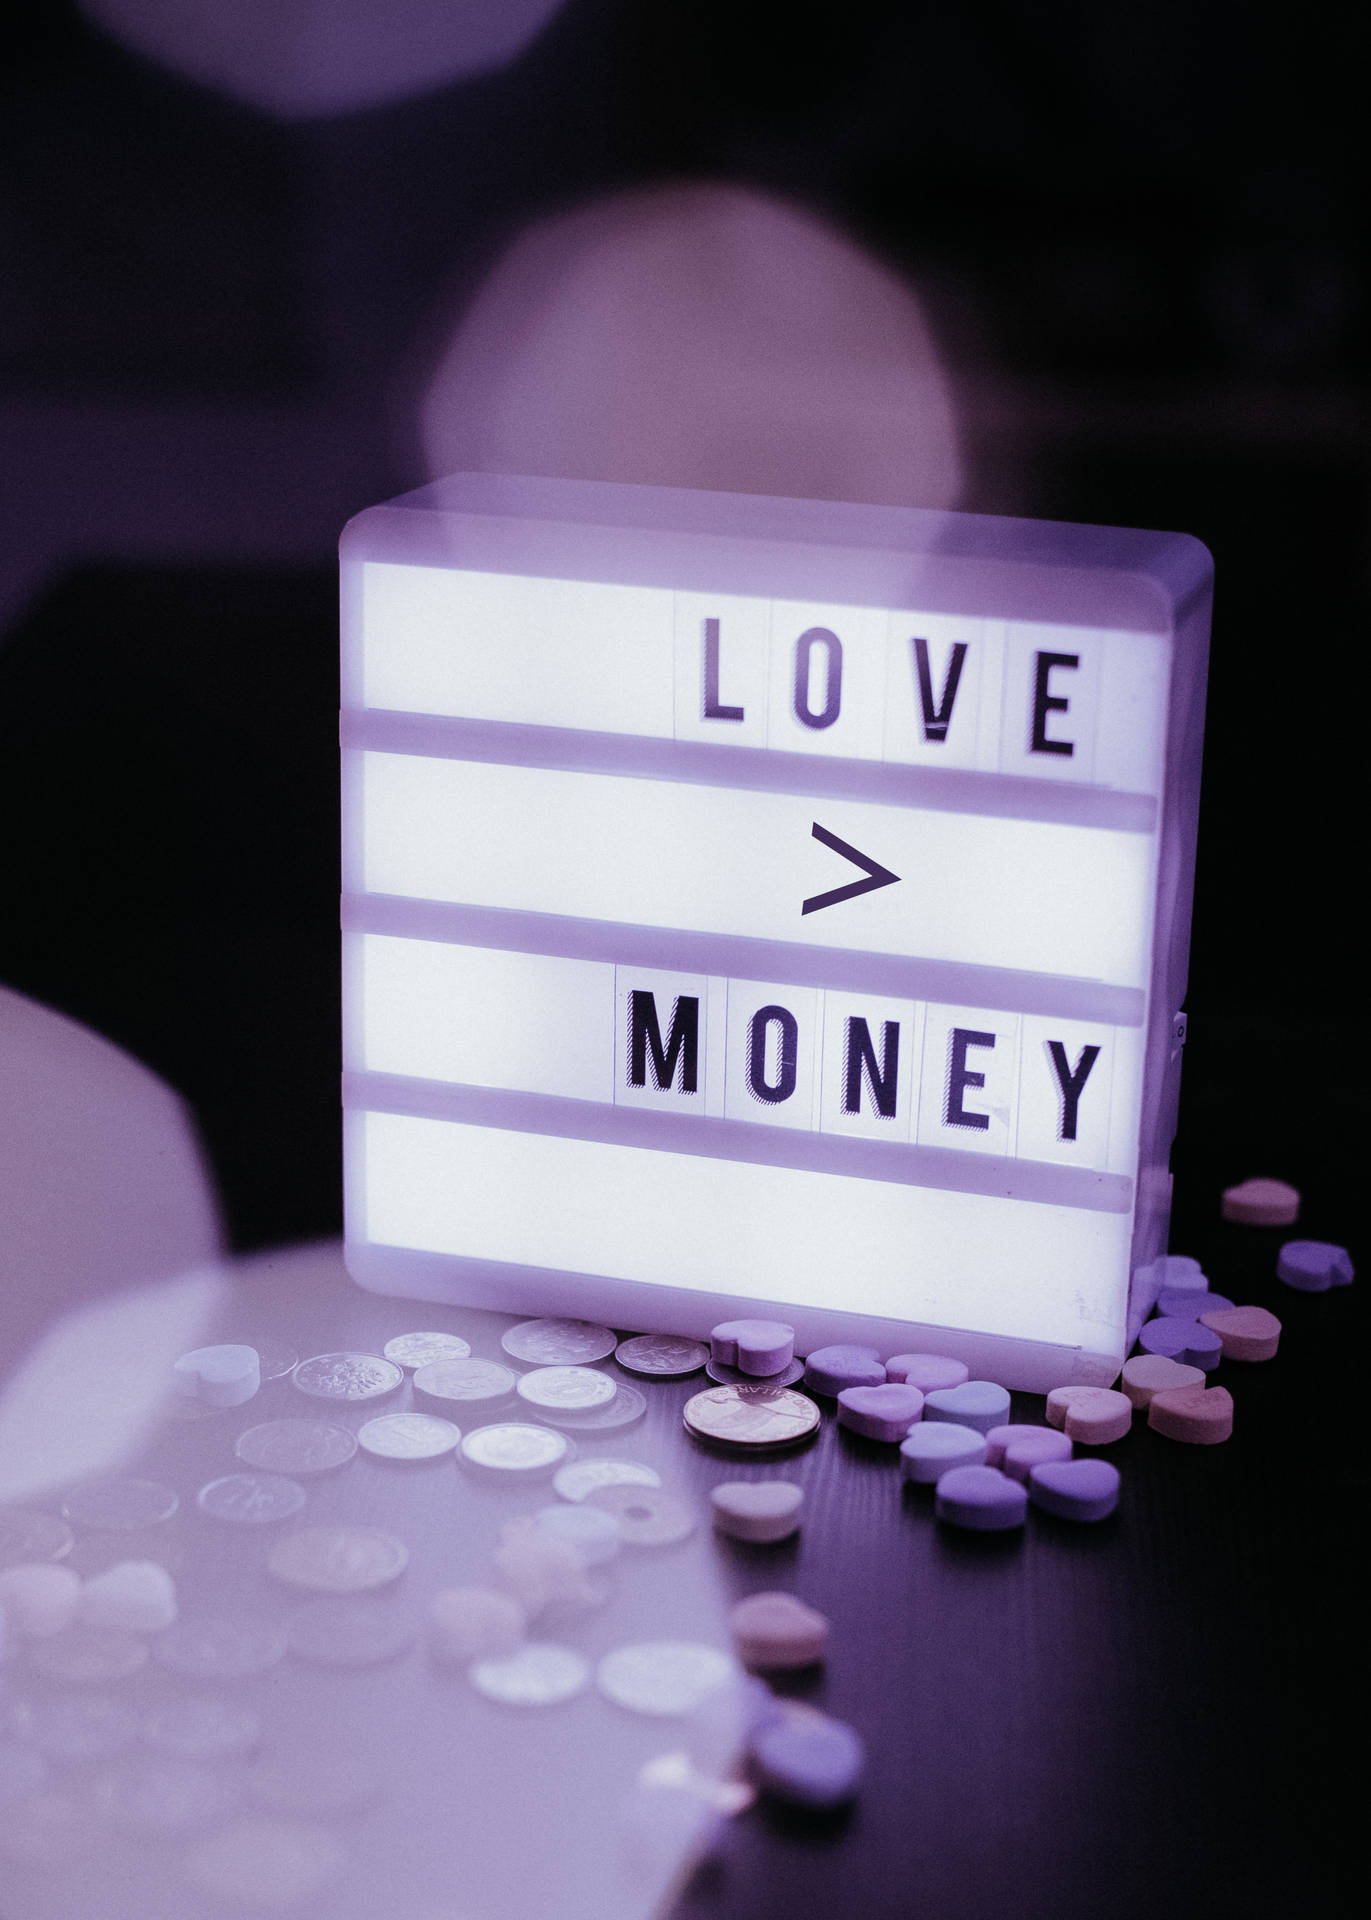 Money Is Temporary, Love Is Forever